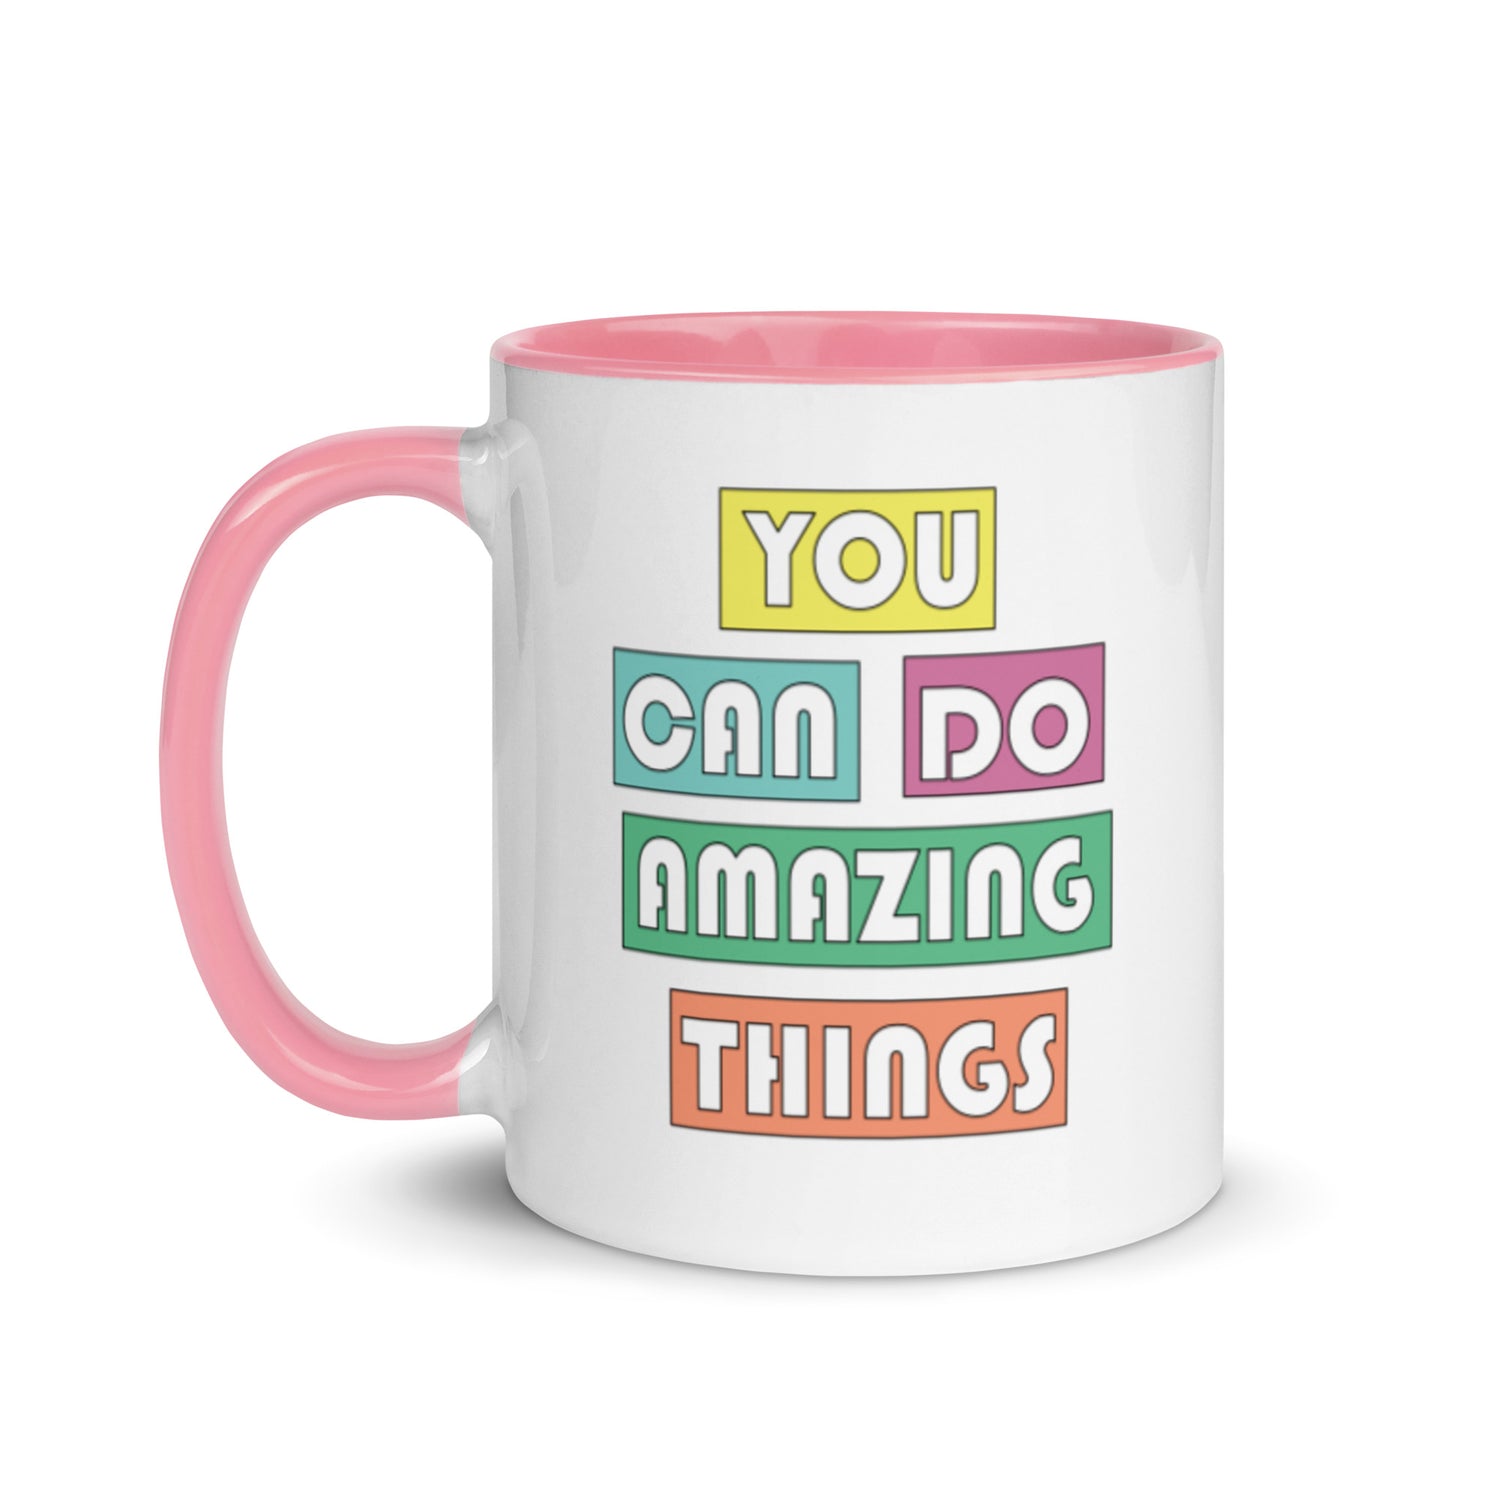 you can do amazing things mug with pink interior